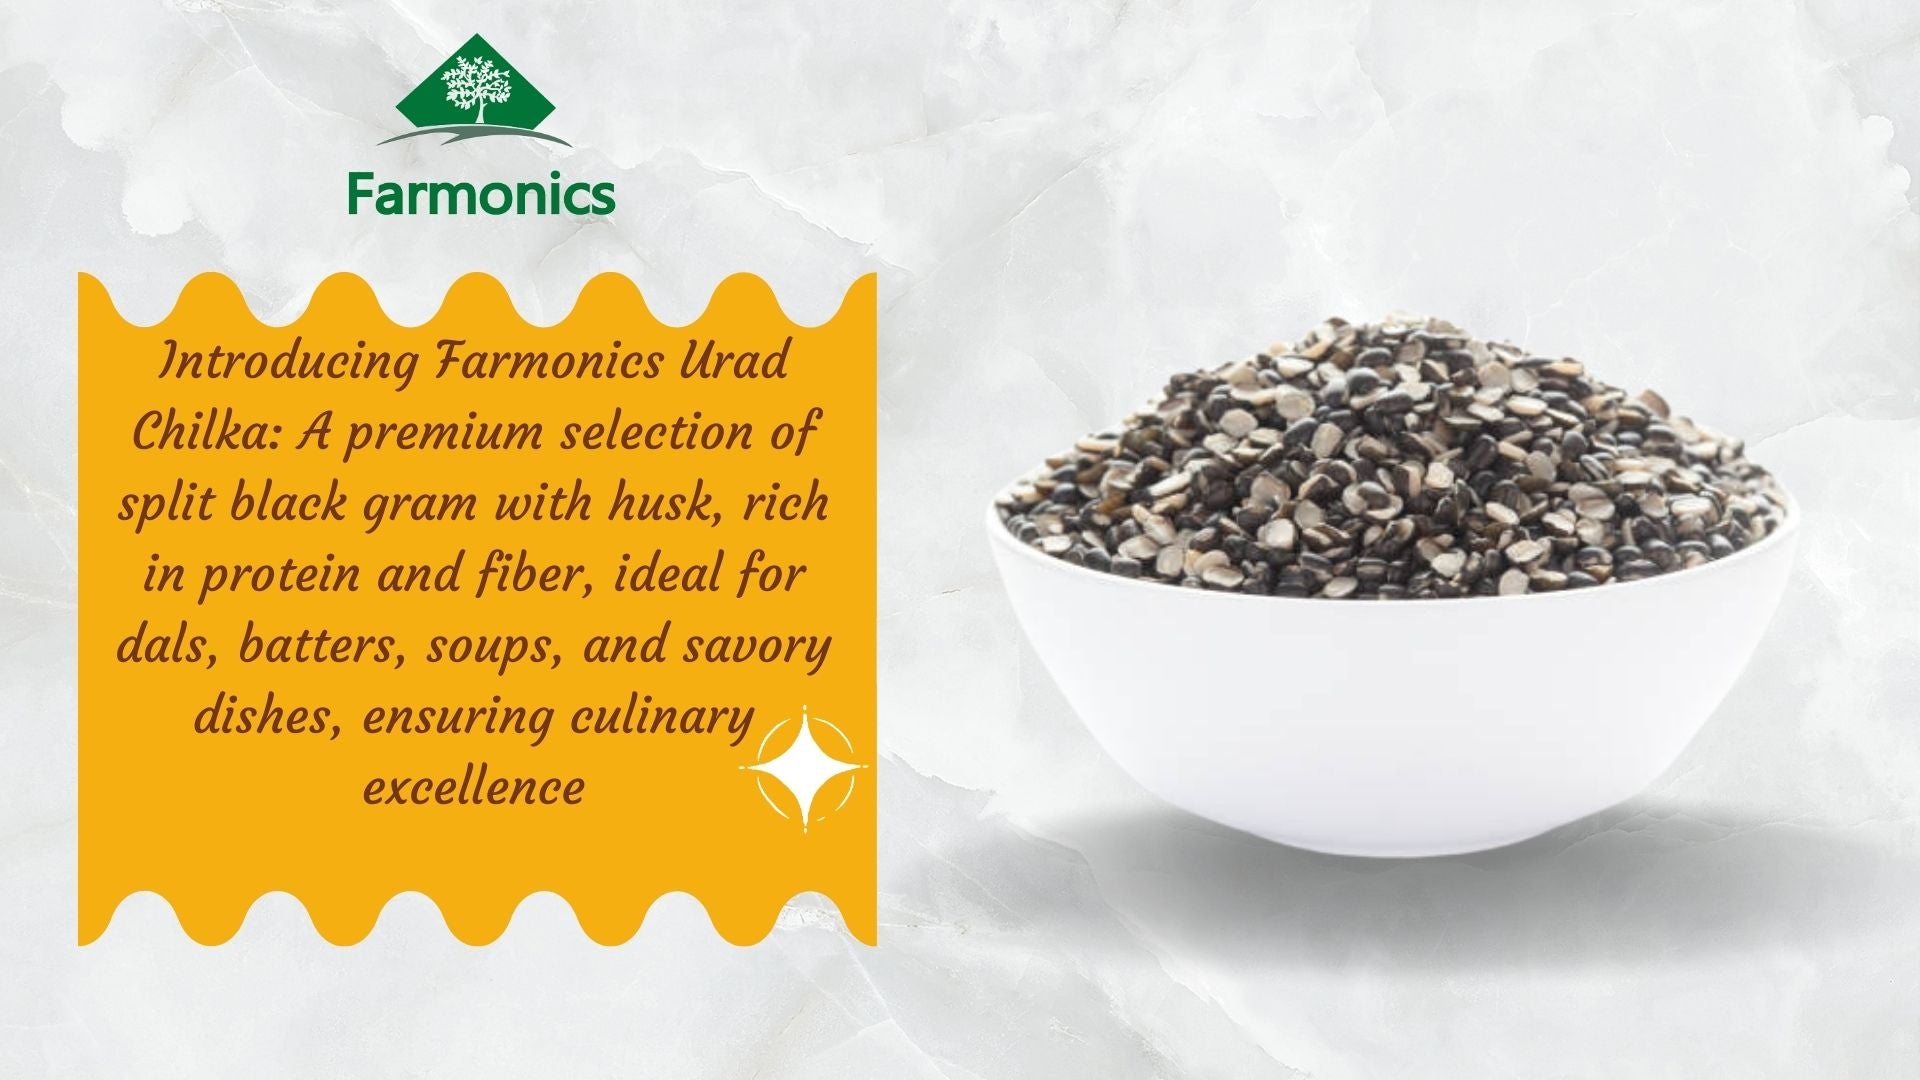 Here are some of the information about Farmonics best quality urad chilka 